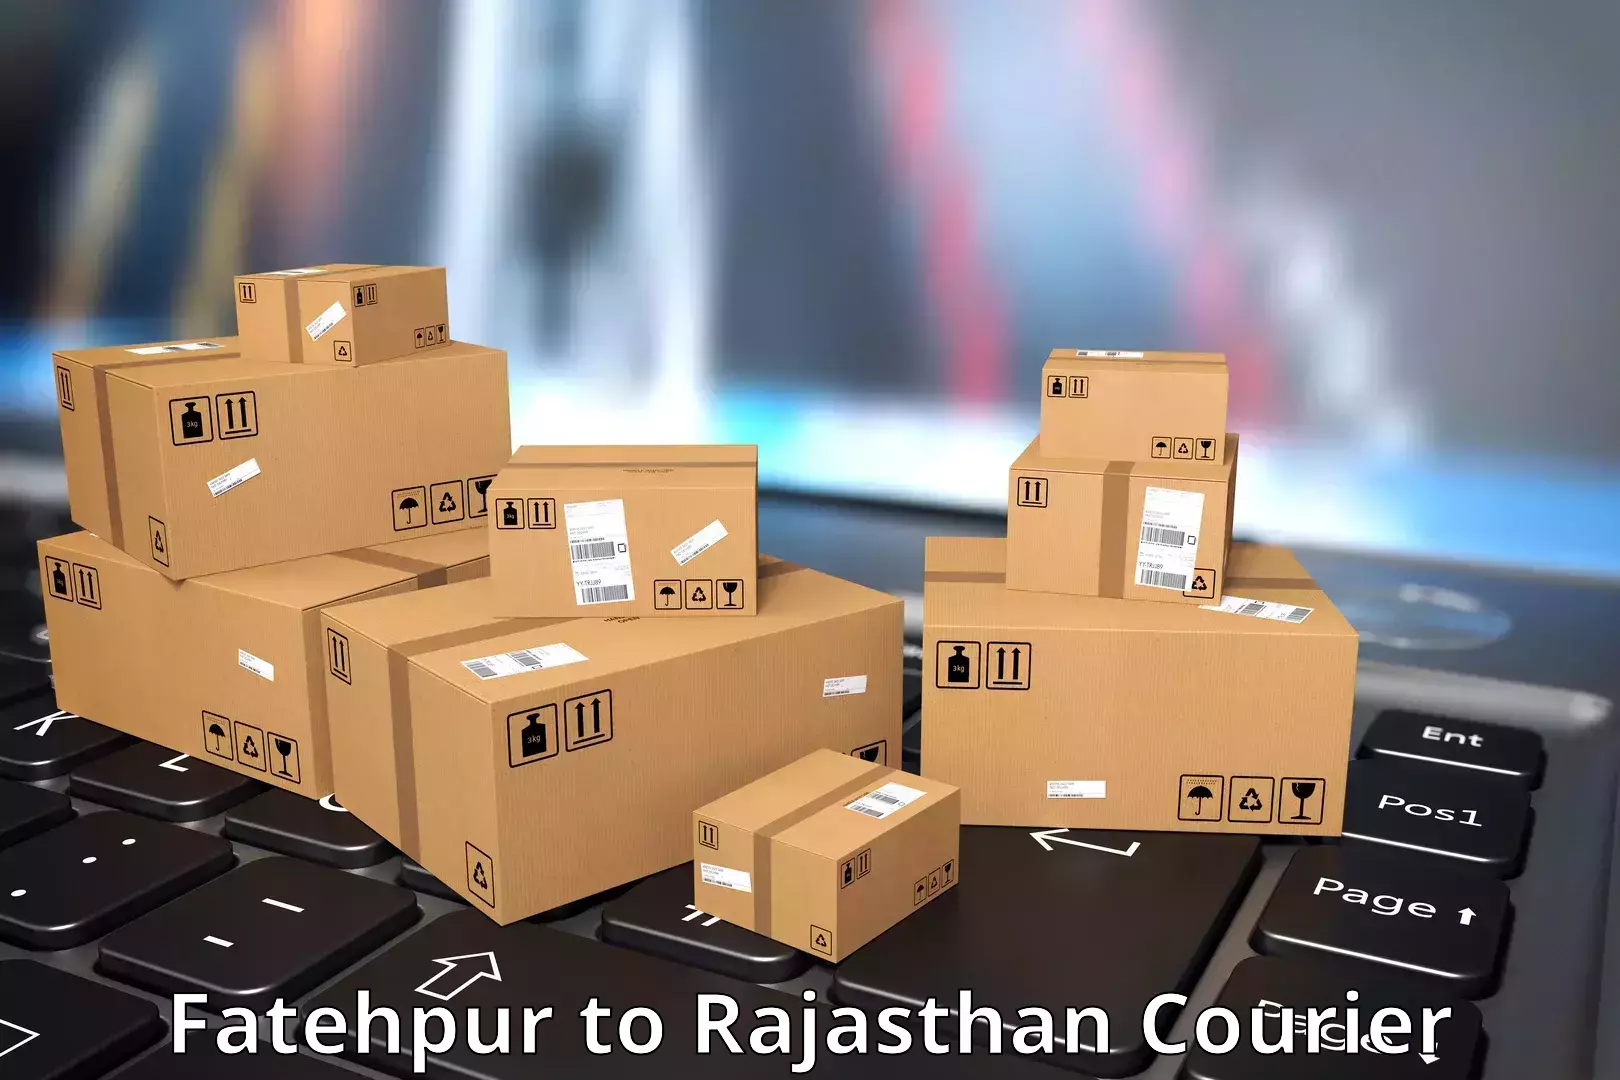 Personal parcel delivery in Fatehpur to Nagaur